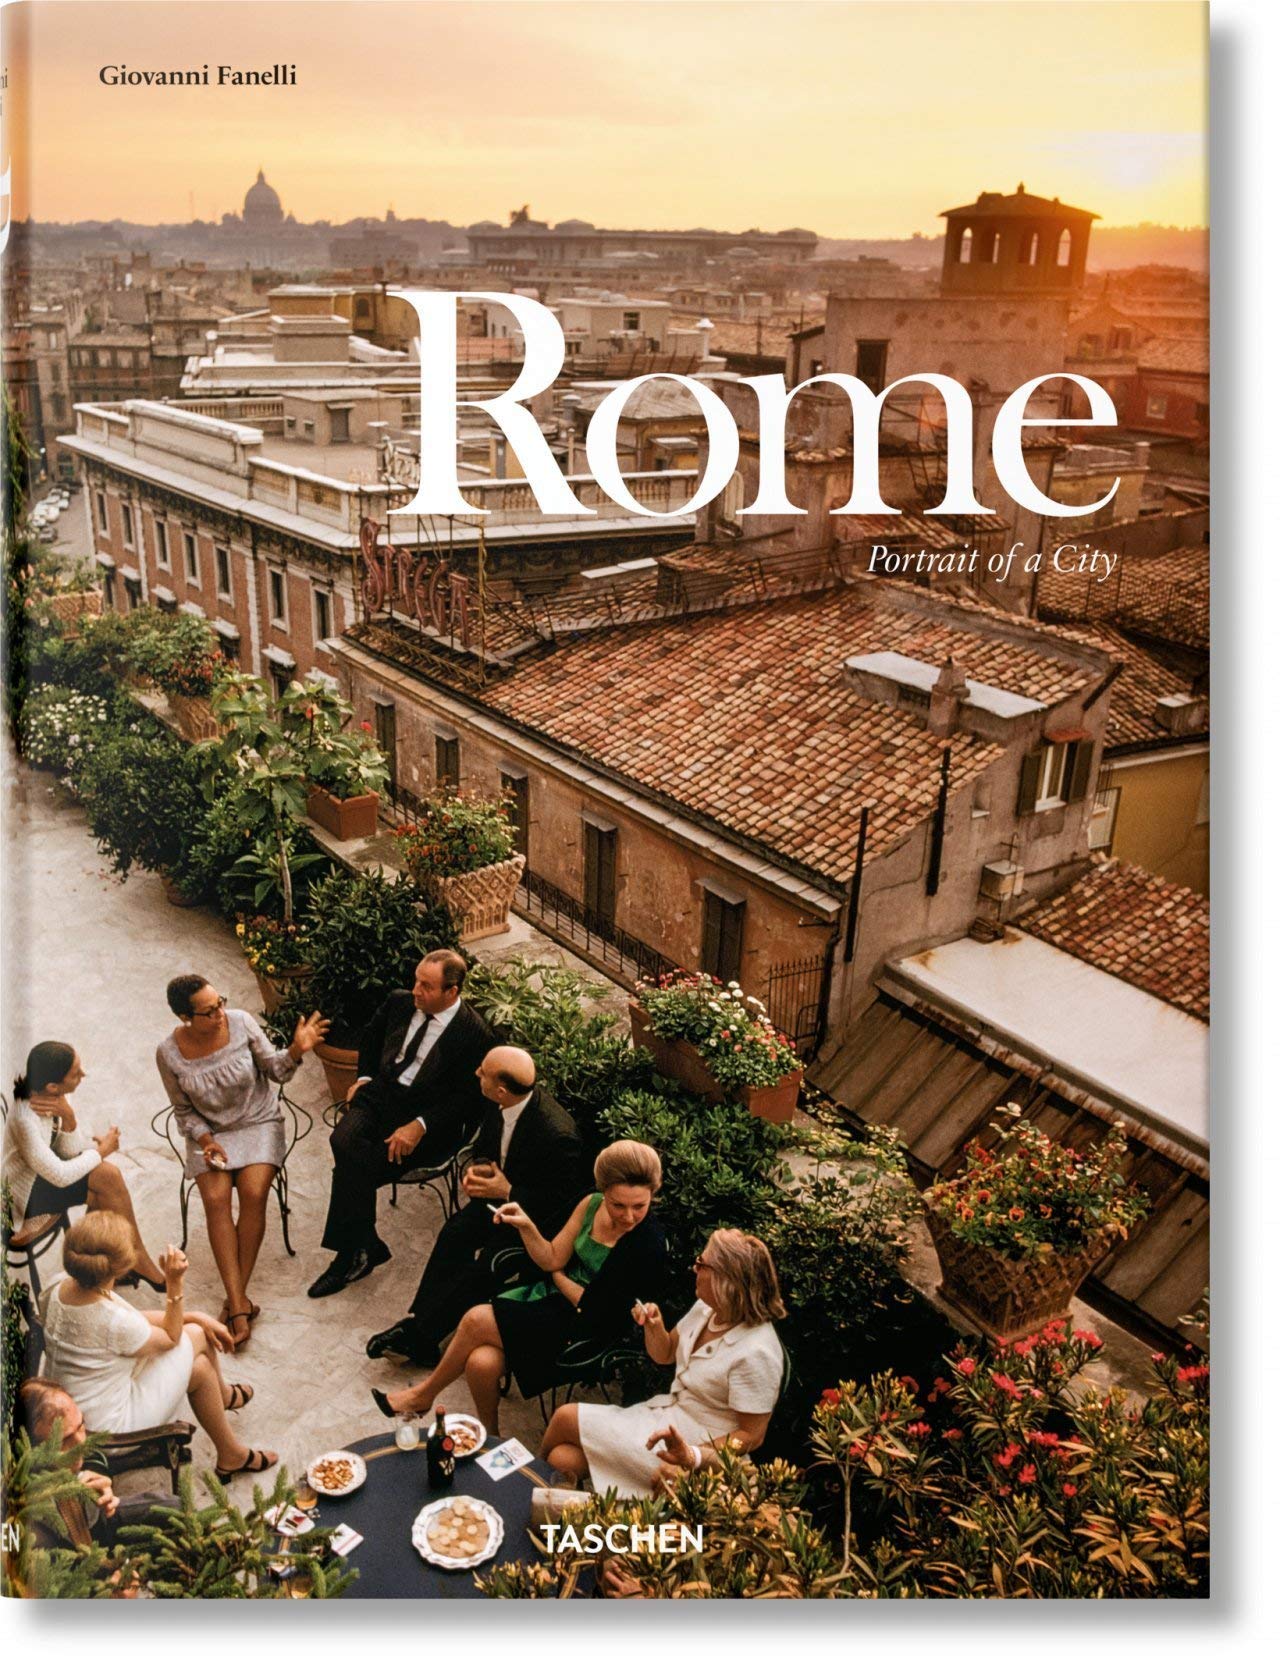 gustobeats book club for rome and italy Rome a portrait of city